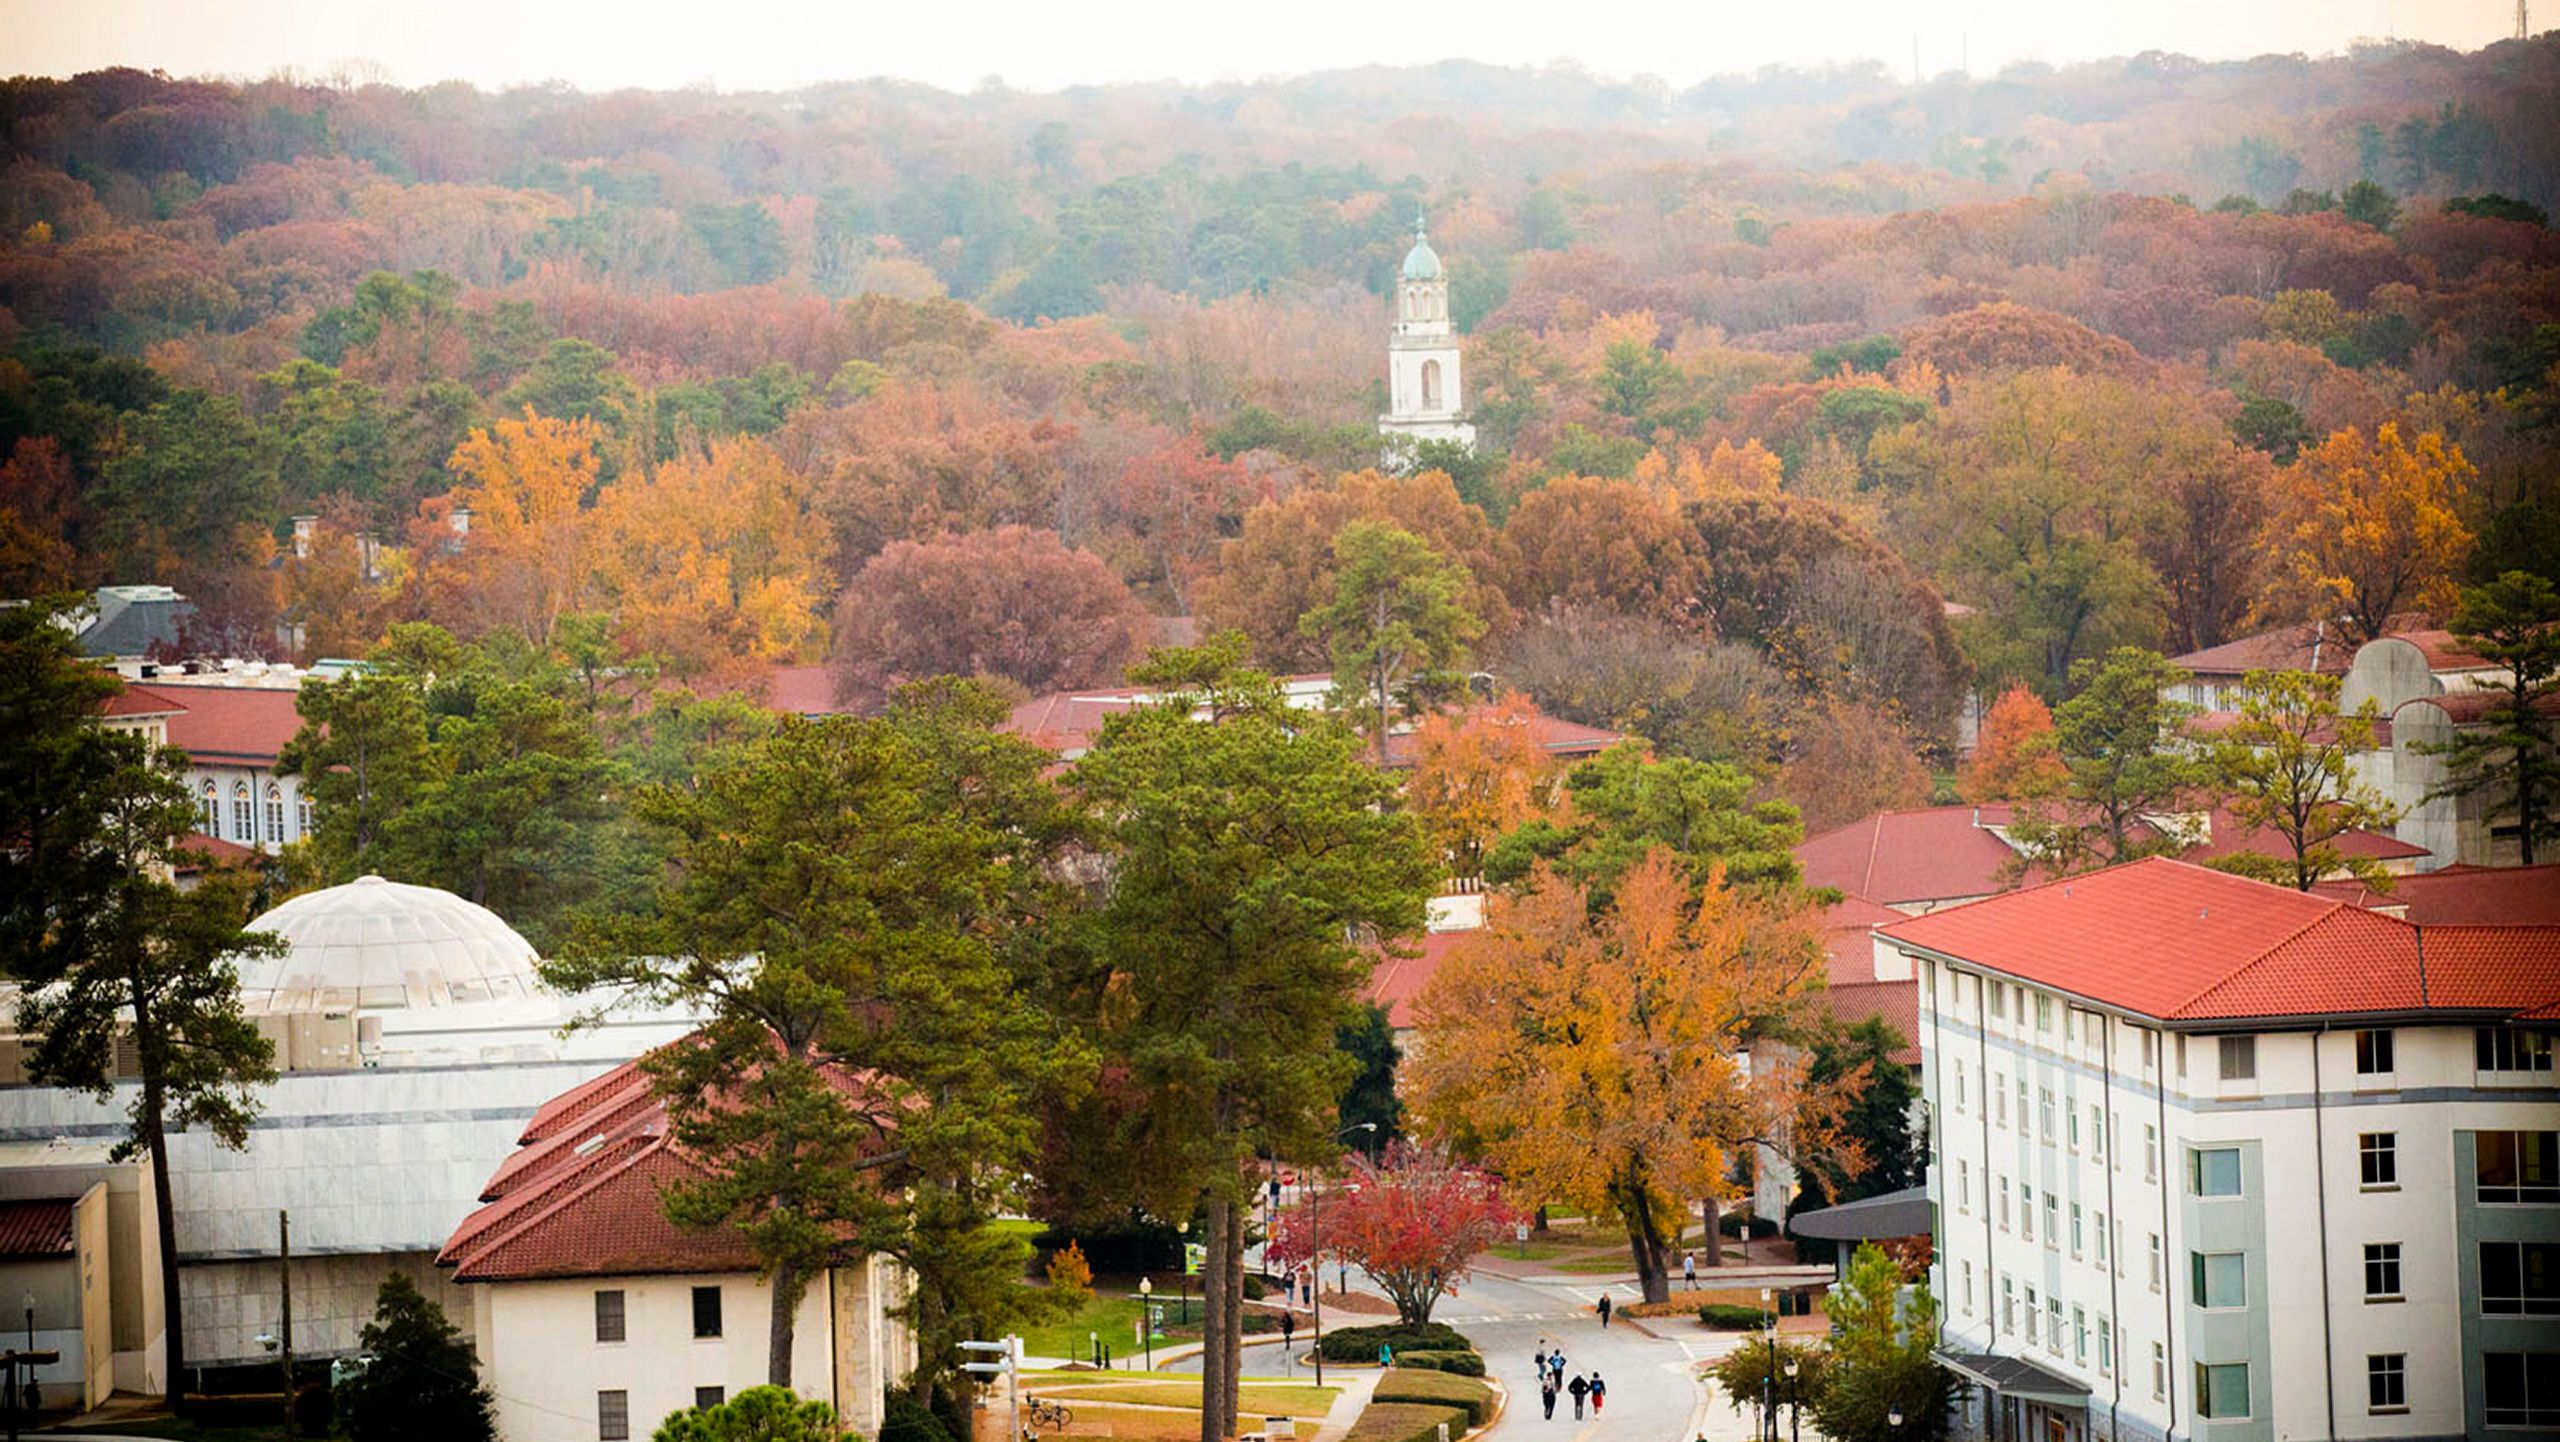 view of campus in the fall from above with red tile roofs and colorful trees